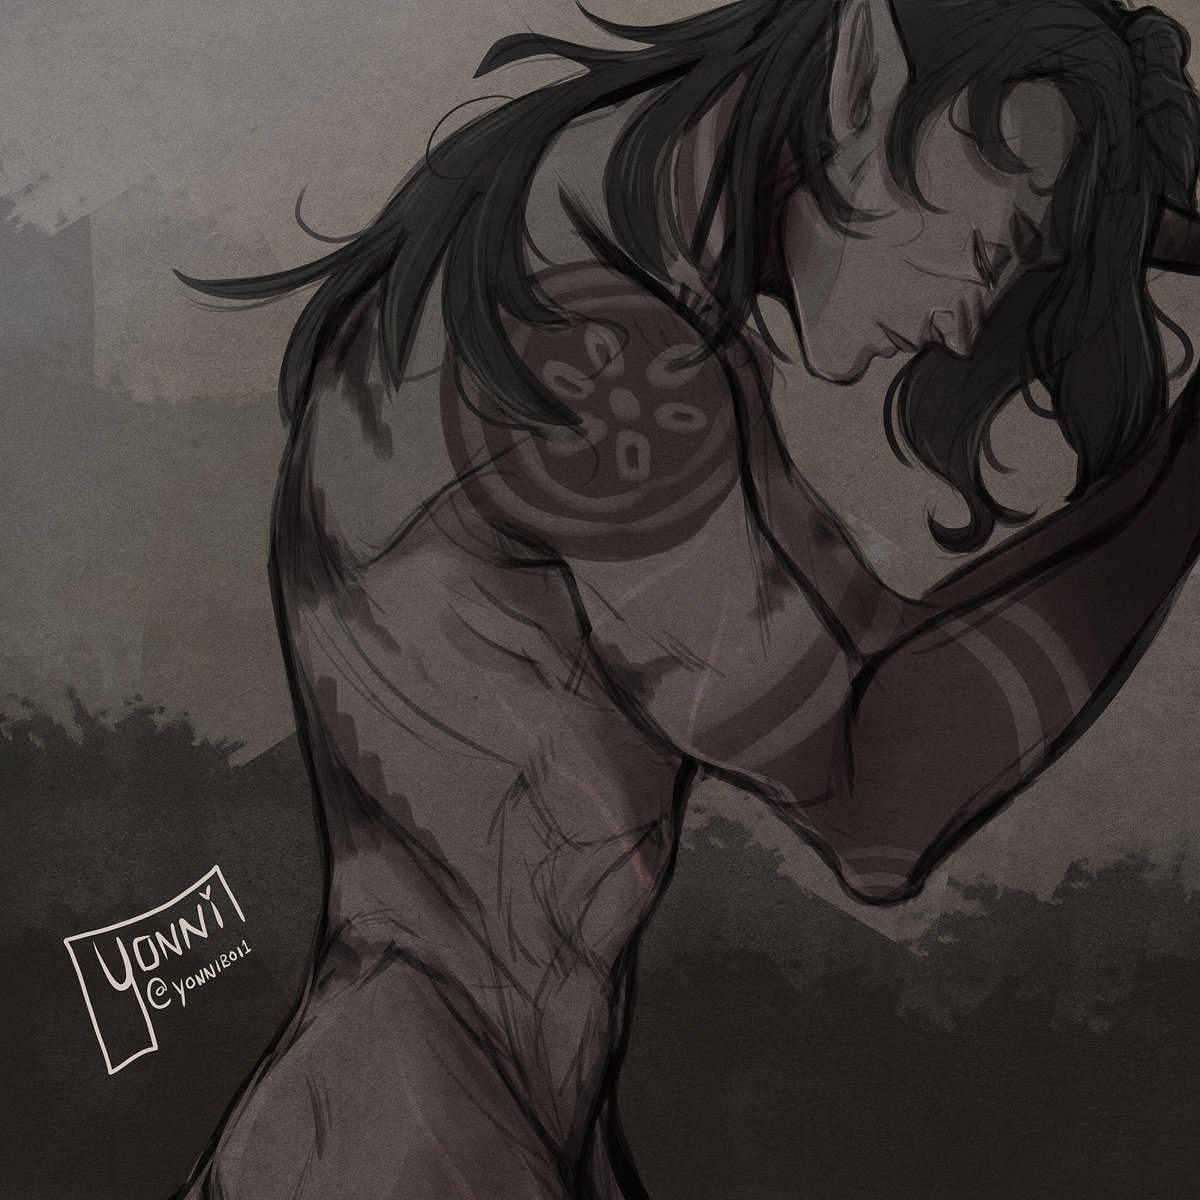 Lomei without geisha-makeup is usually my go-to for anatomy practice, always naked, he's not a shy boy. #yokai #ocart